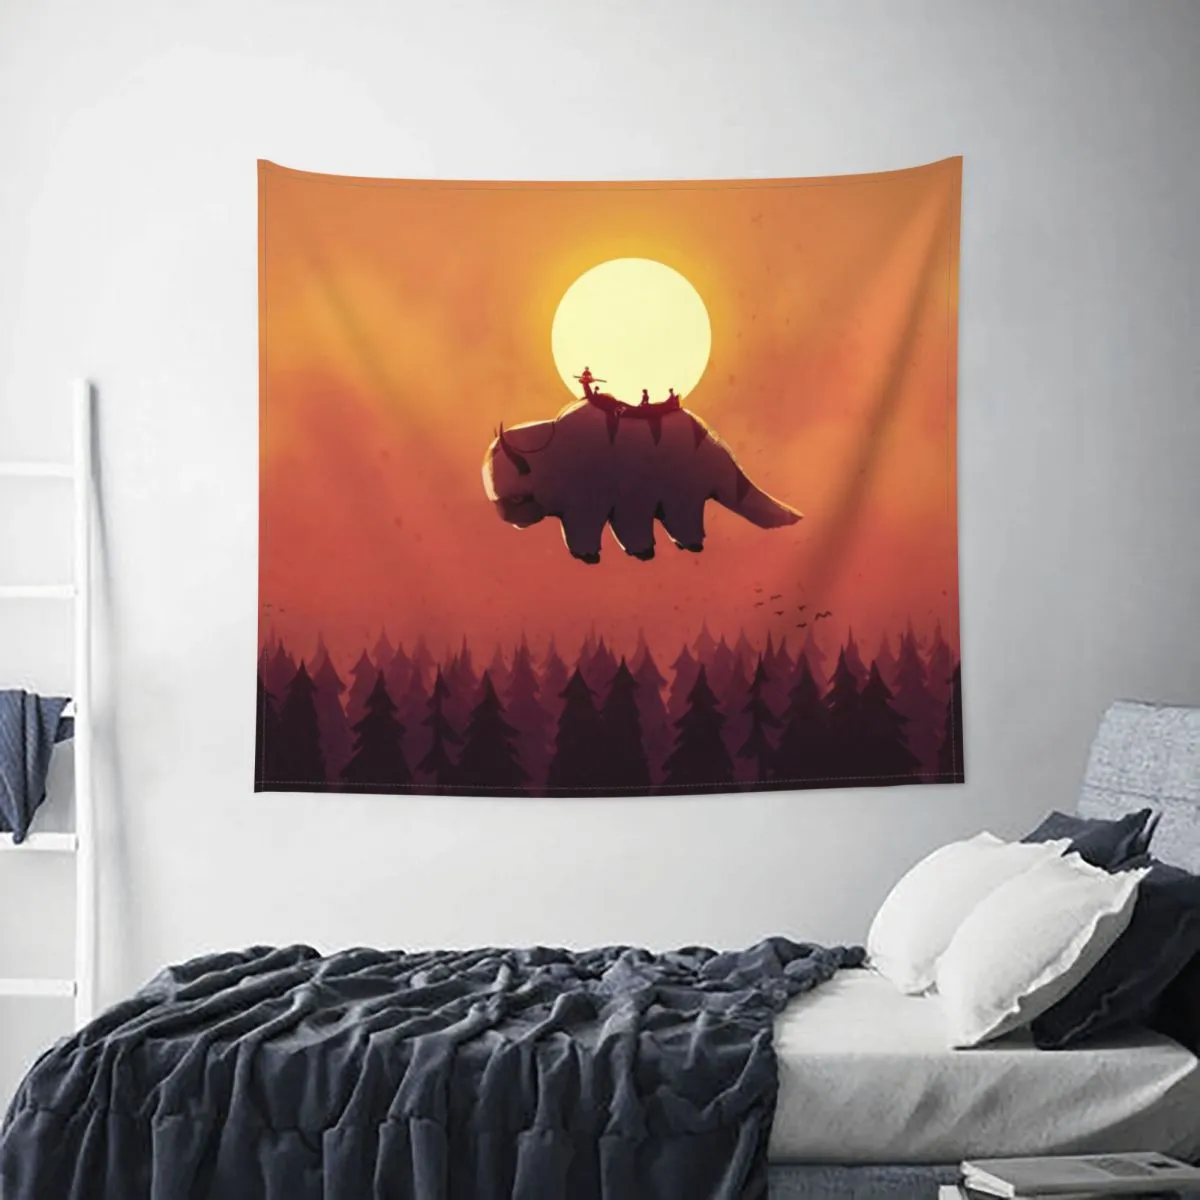 Avatar The Last Airbender Tapestry Hippie Wall Hanging Appa Decoration for Bedroom Table Cover Psychedelic Wall - Avatar The Last Airbender Store